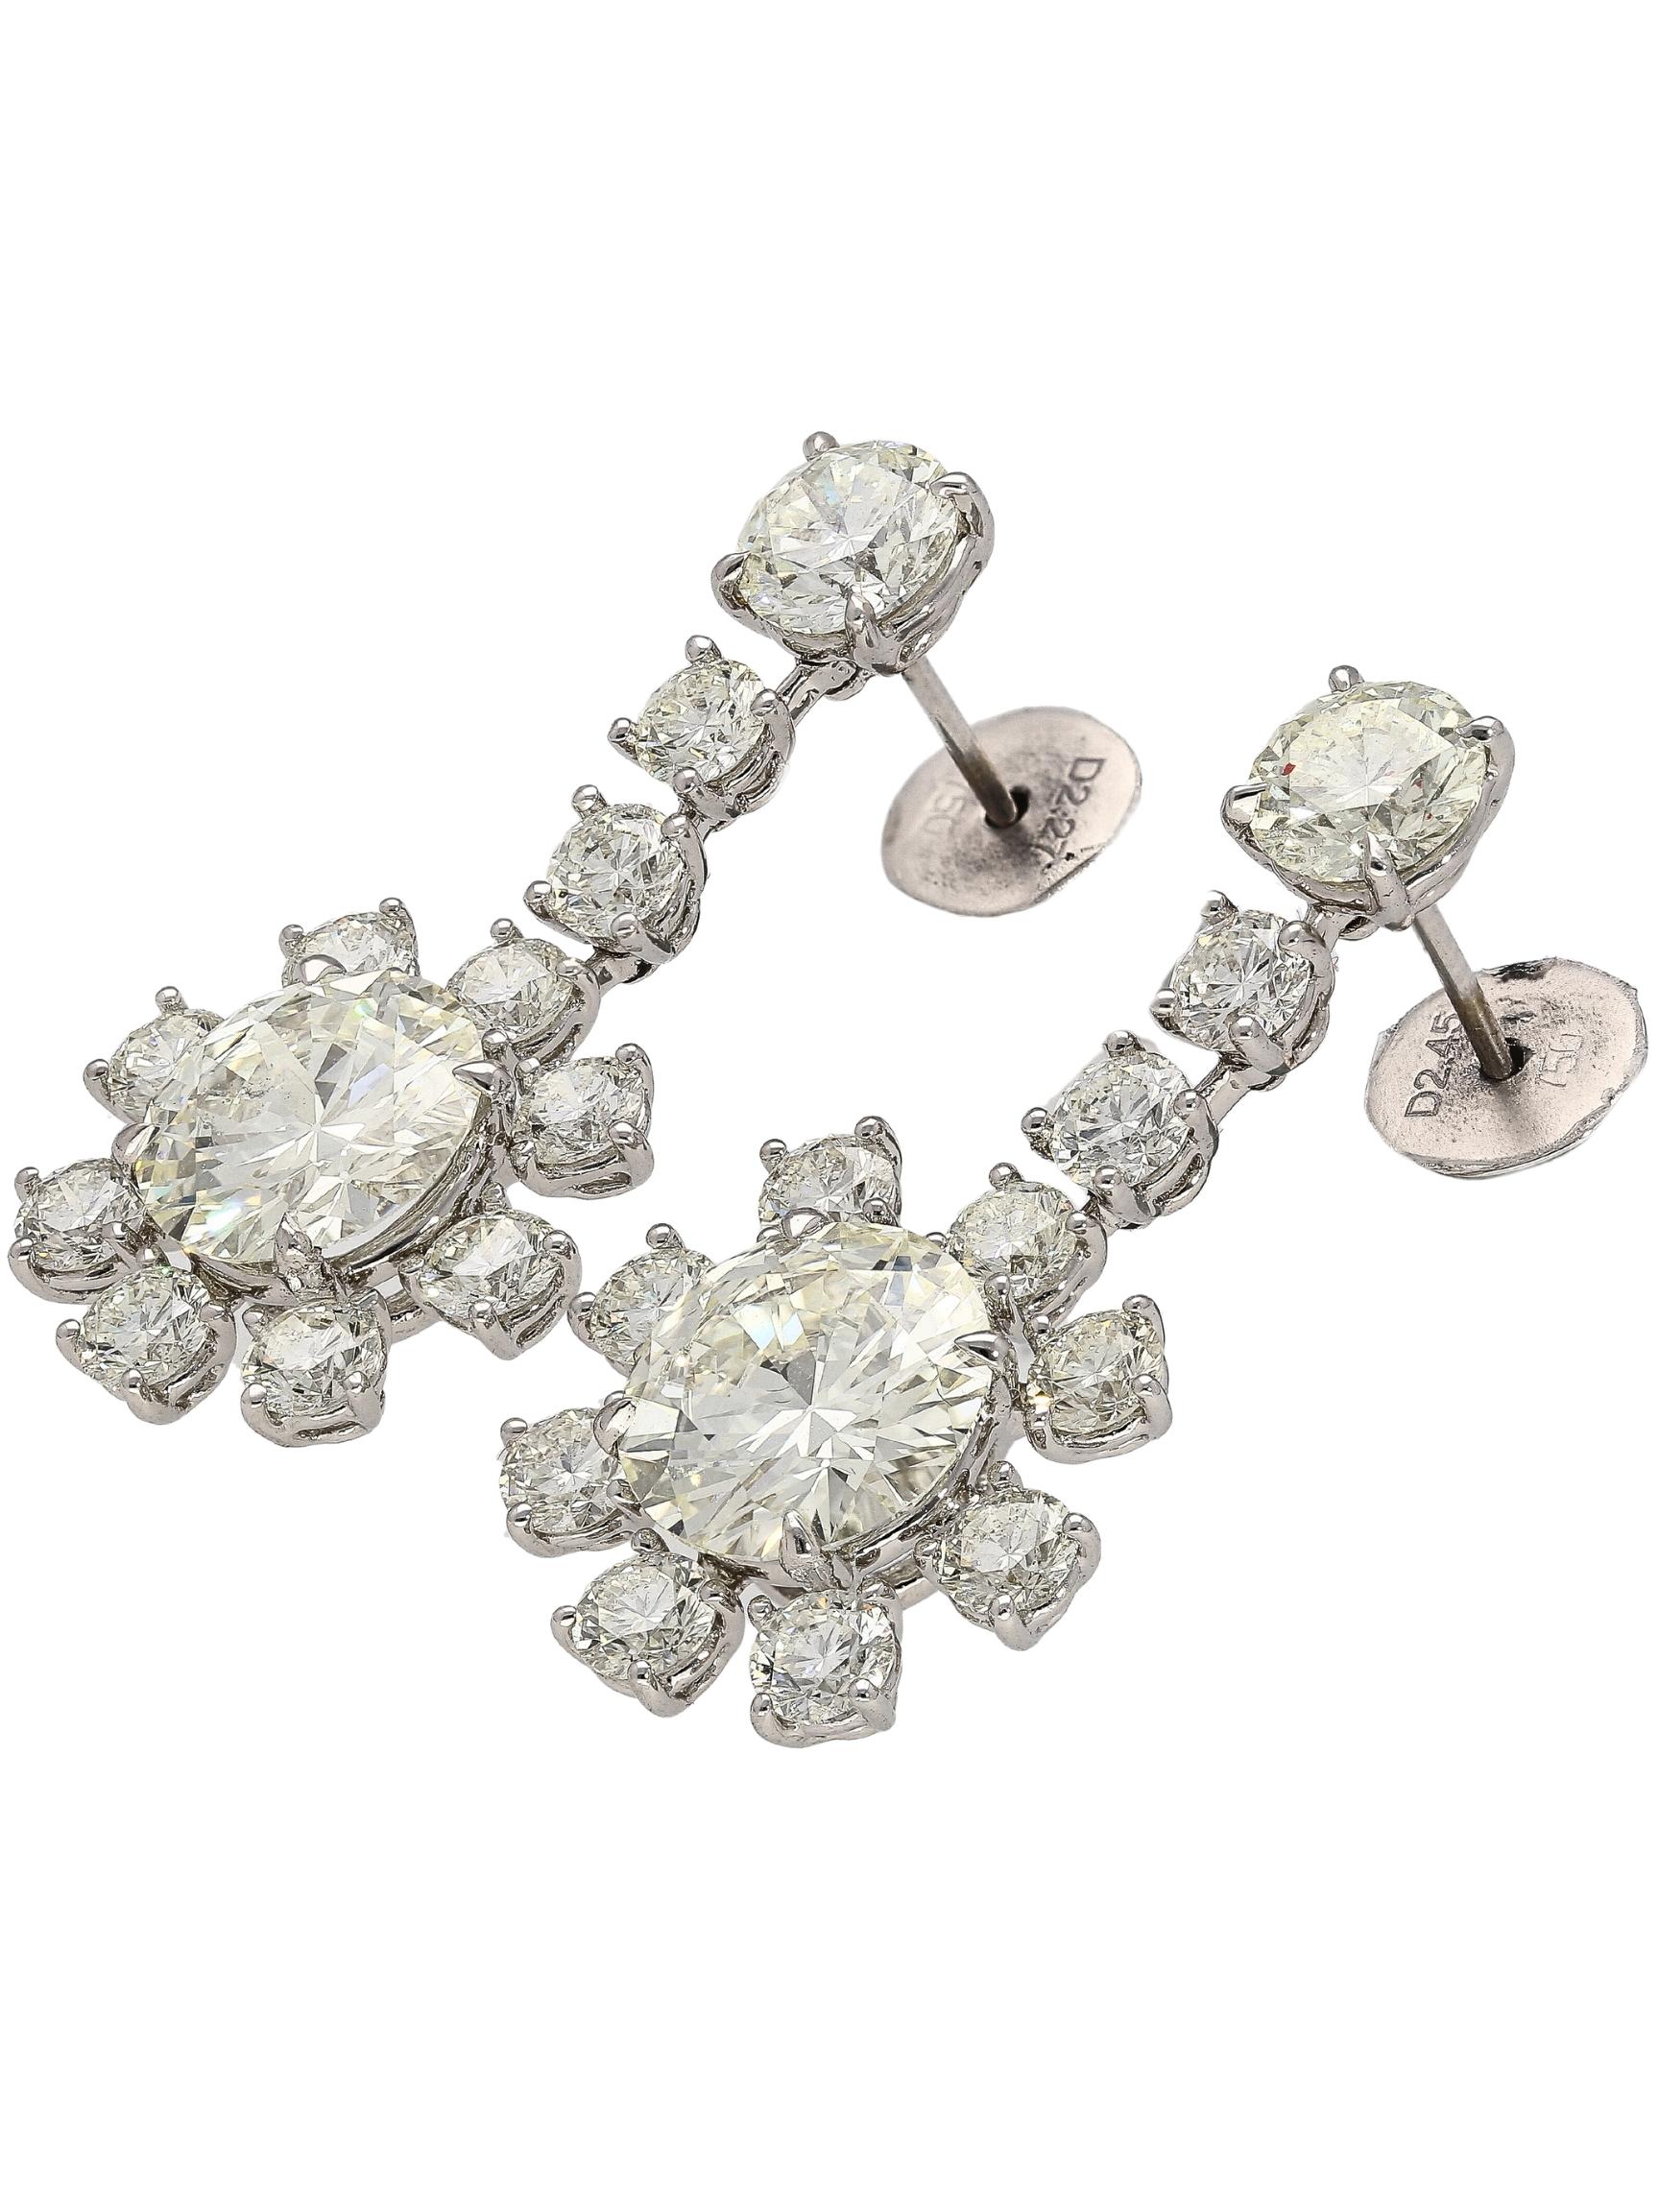 30+ Carat White Diamond Necklace and Earrings 18K Set Certified Round-Brilliant For Sale 3